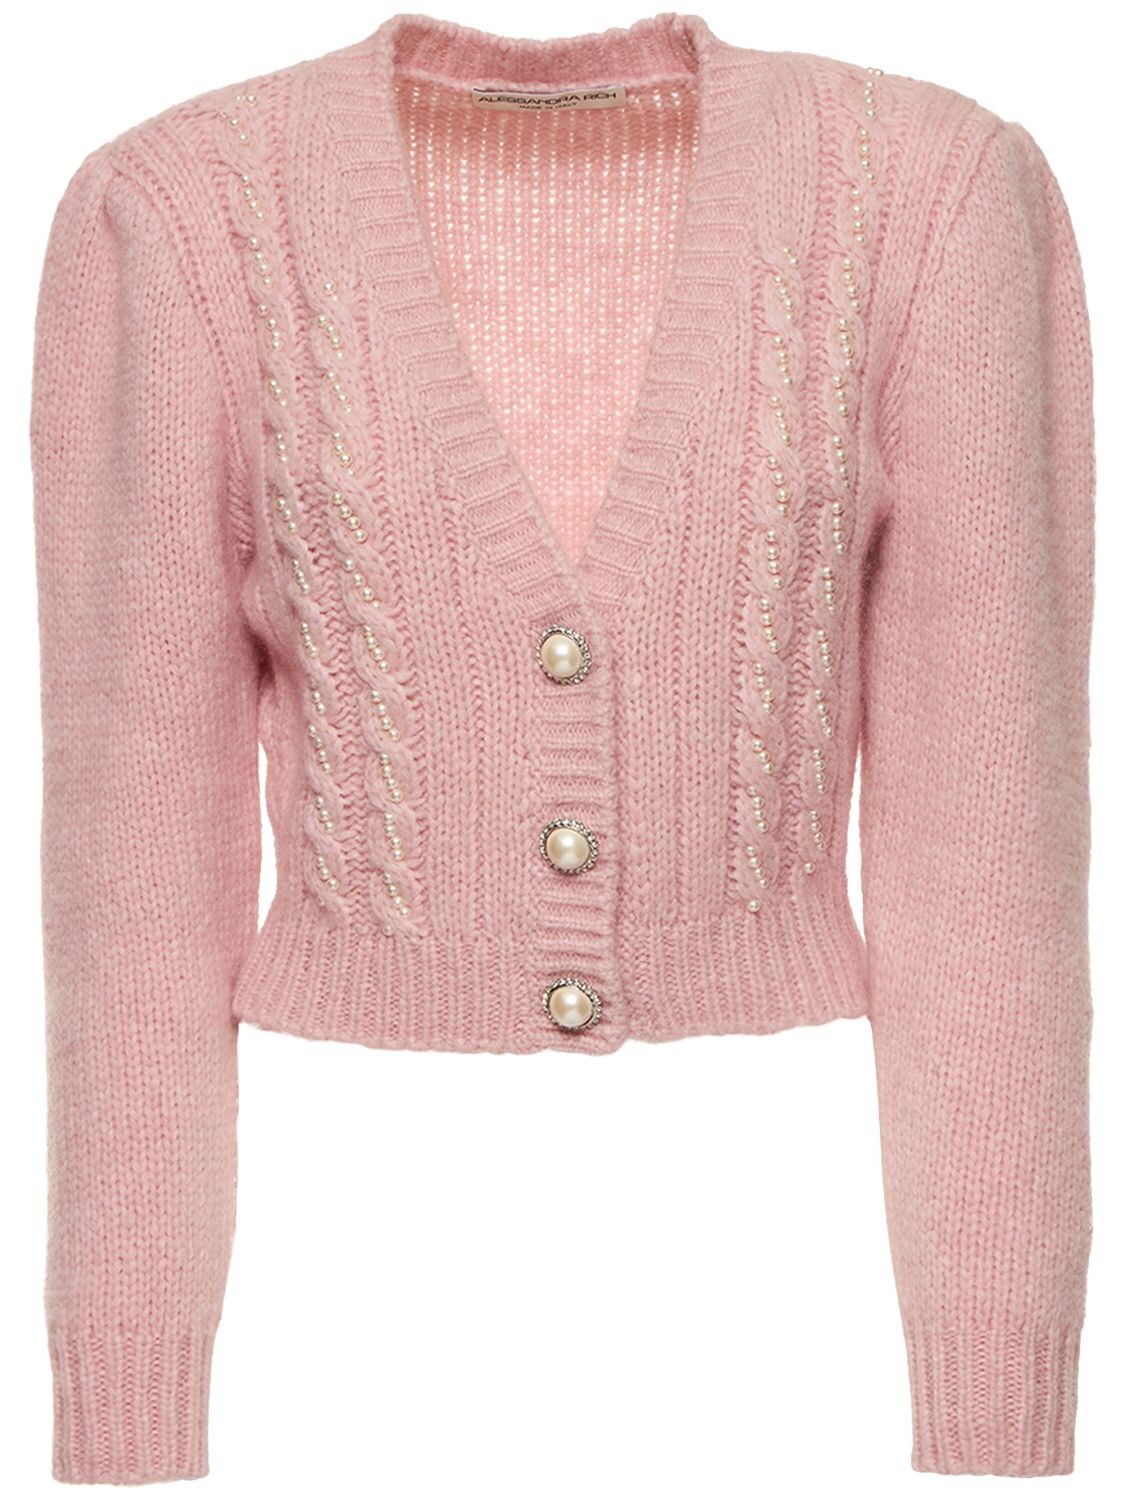 ALESSANDRA RICH WOOL BLEND CABLE KNIT CARDIGAN